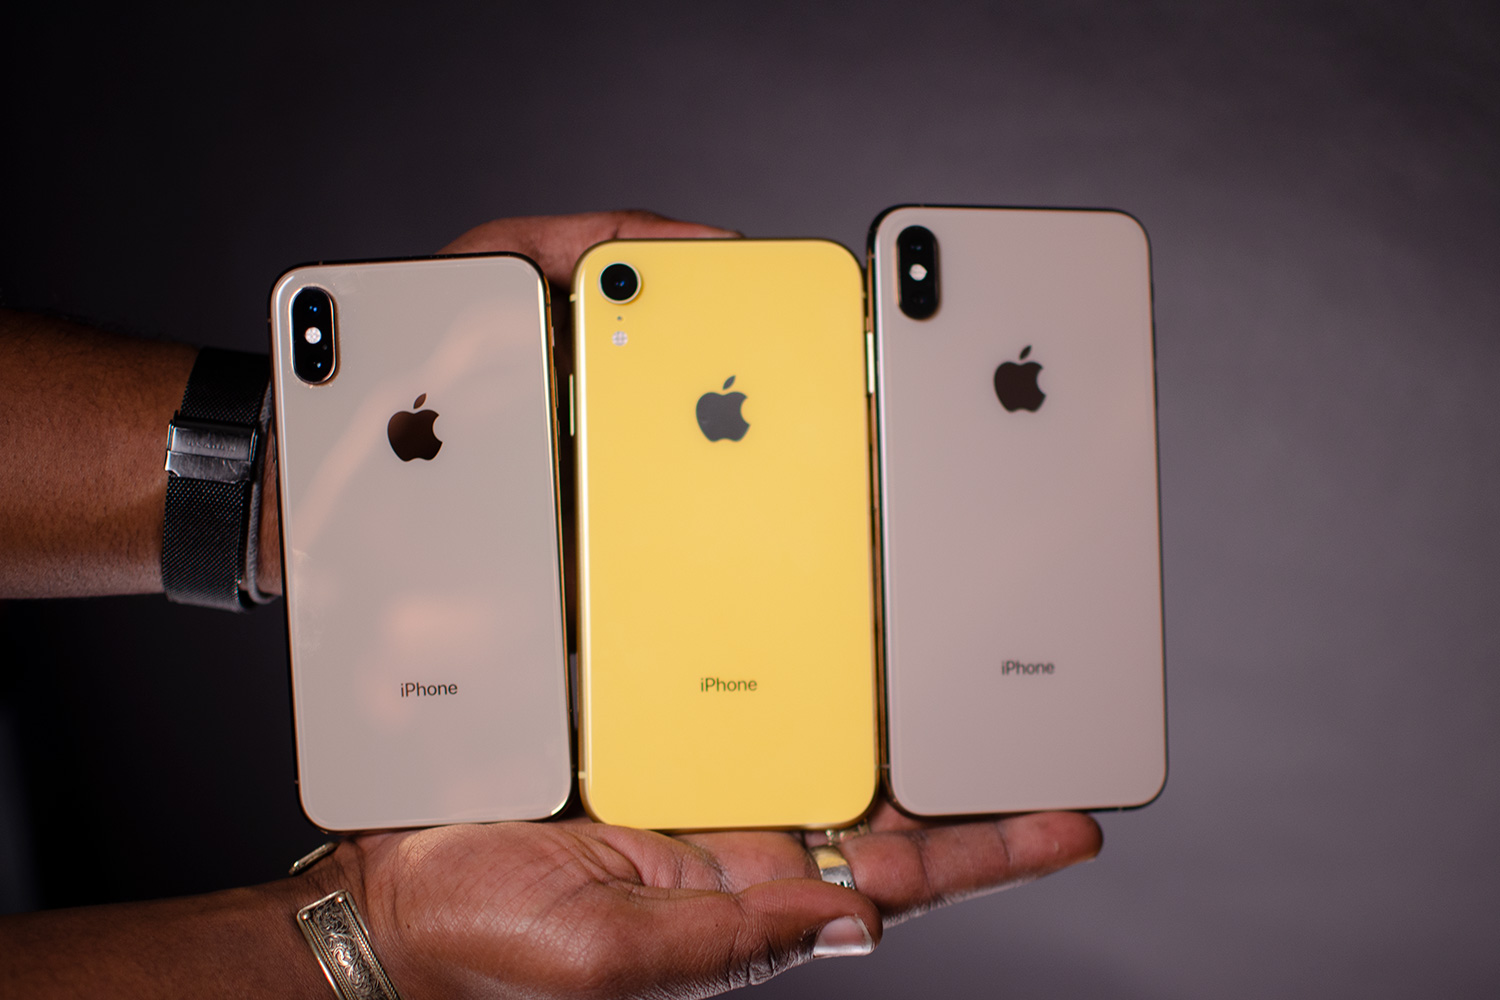 Iphone Xr, Iphone Xs Max, And Iphone Xs Tips And Tricks | Digital Trends